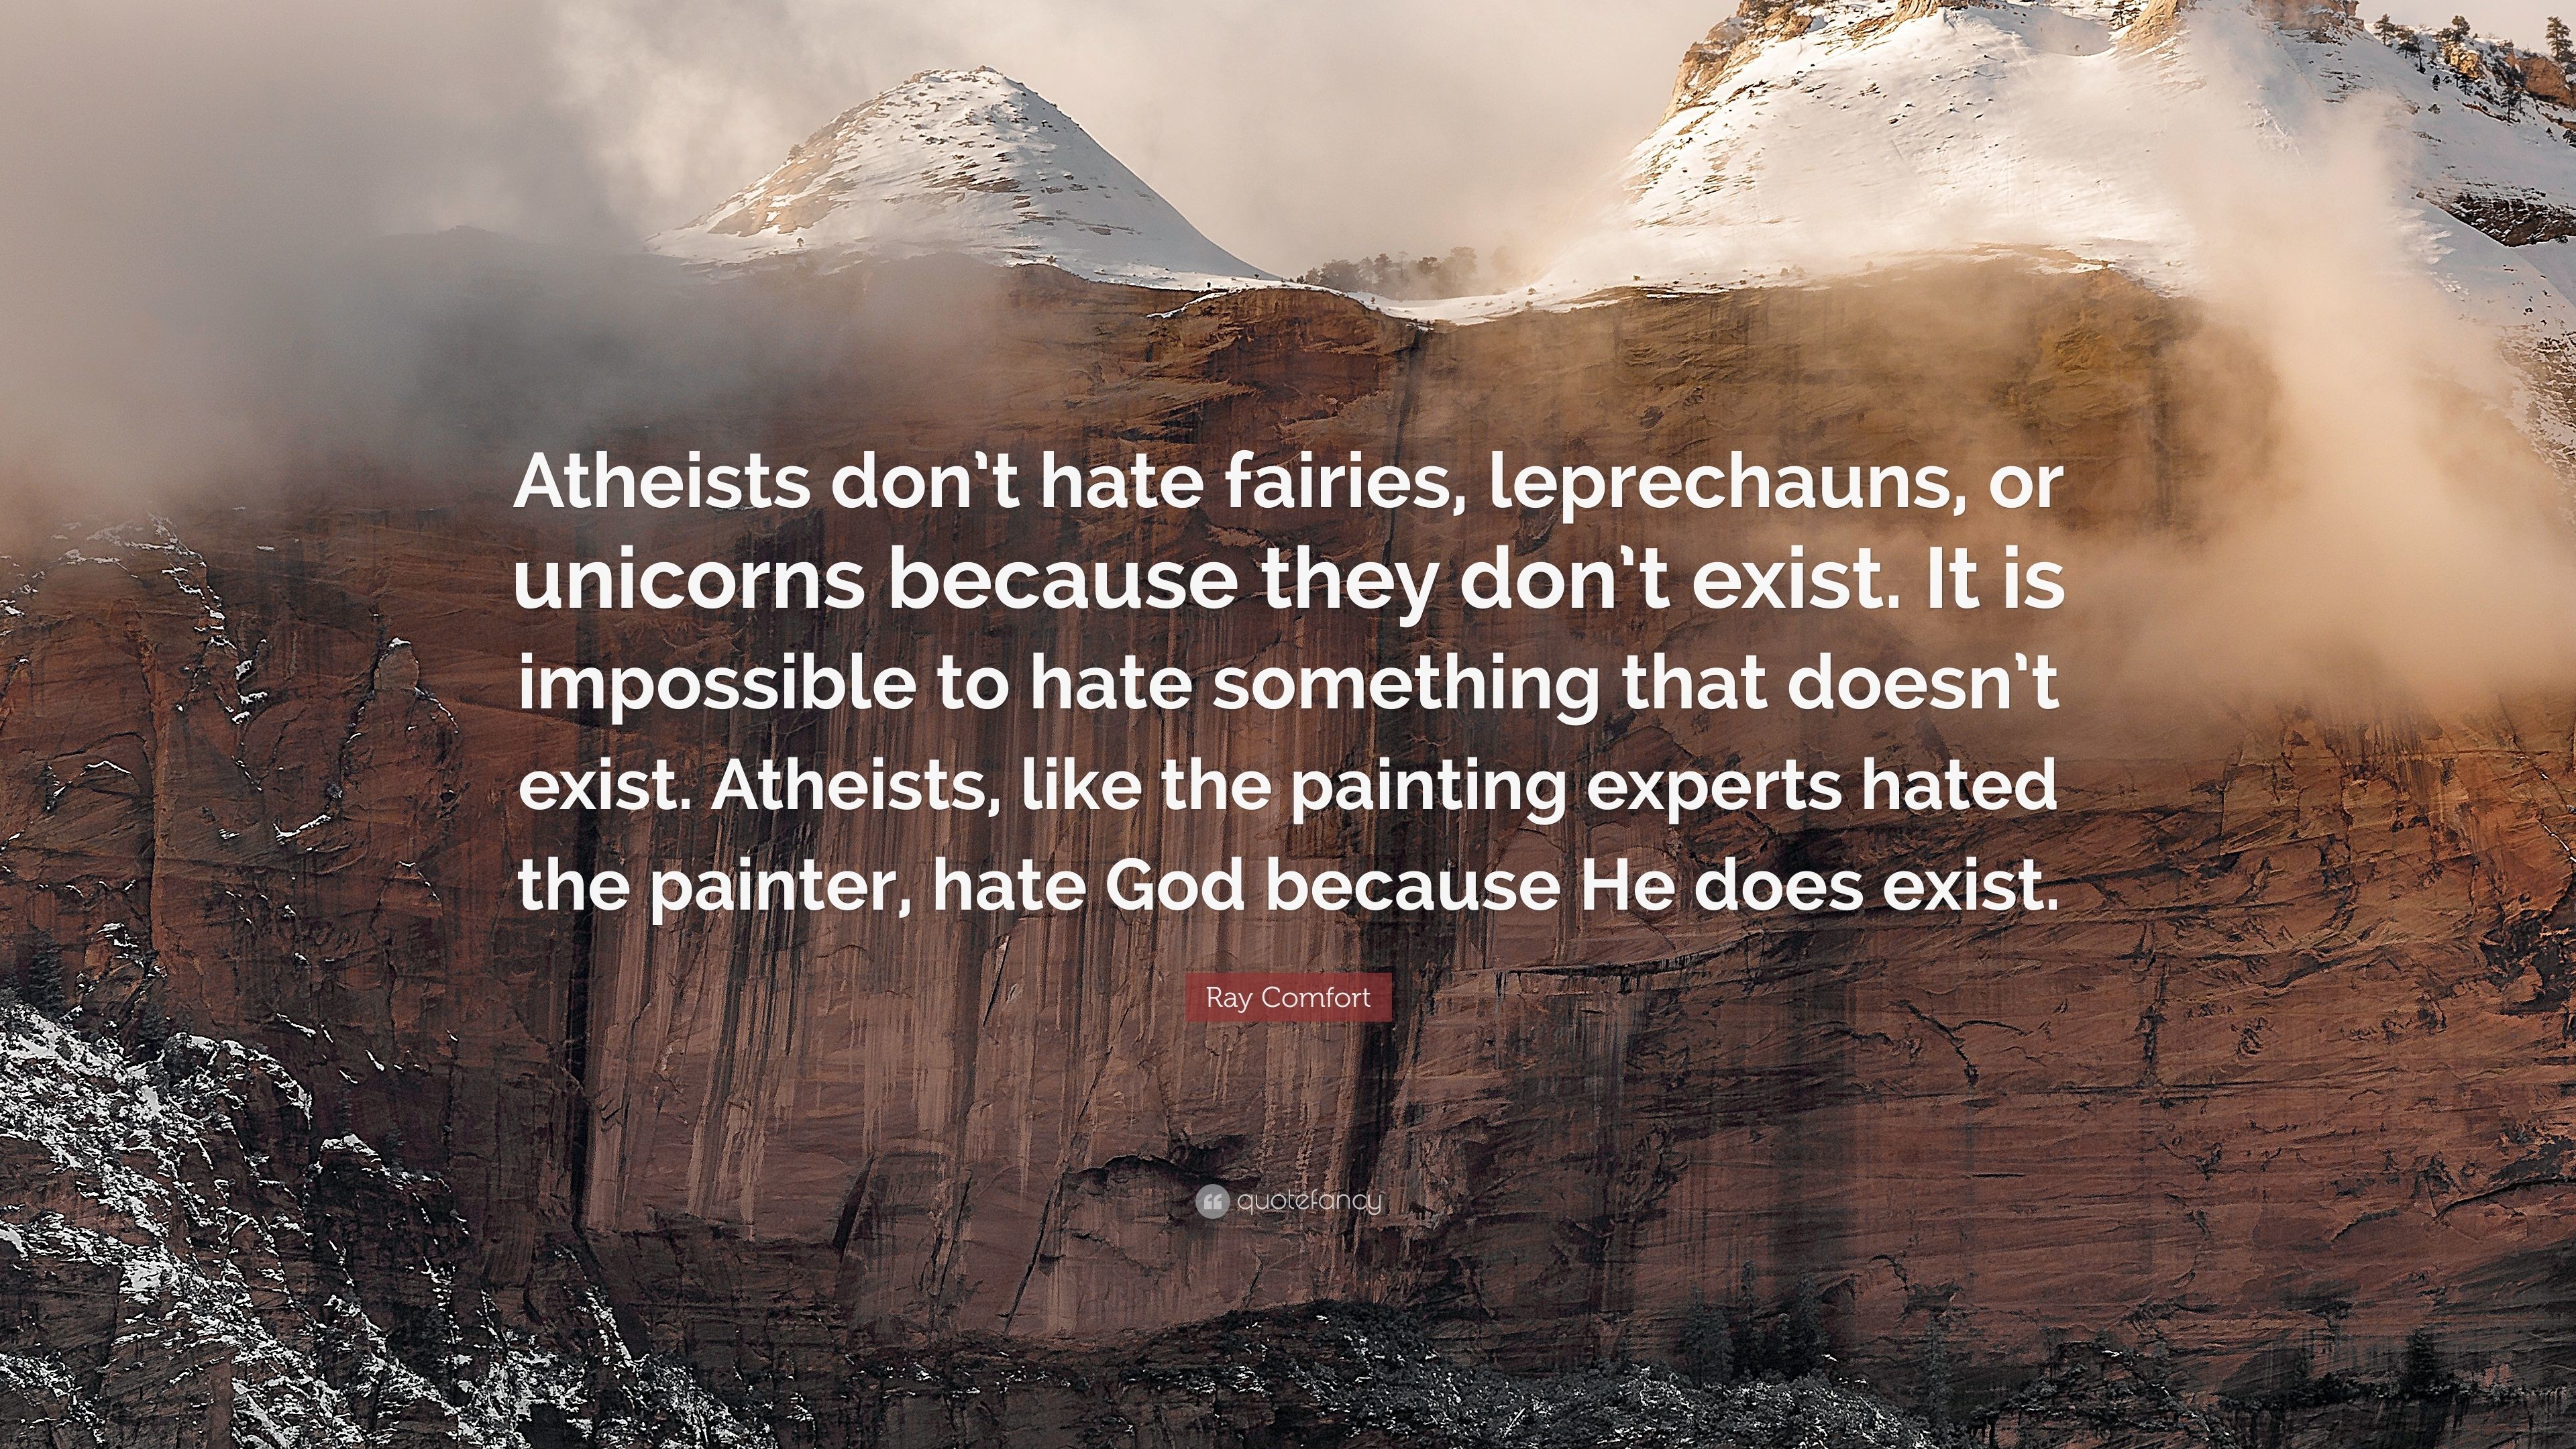 3840x2160 Ray Comfort Quote: “Atheists don't hate fairies, leprechauns, or unicorns